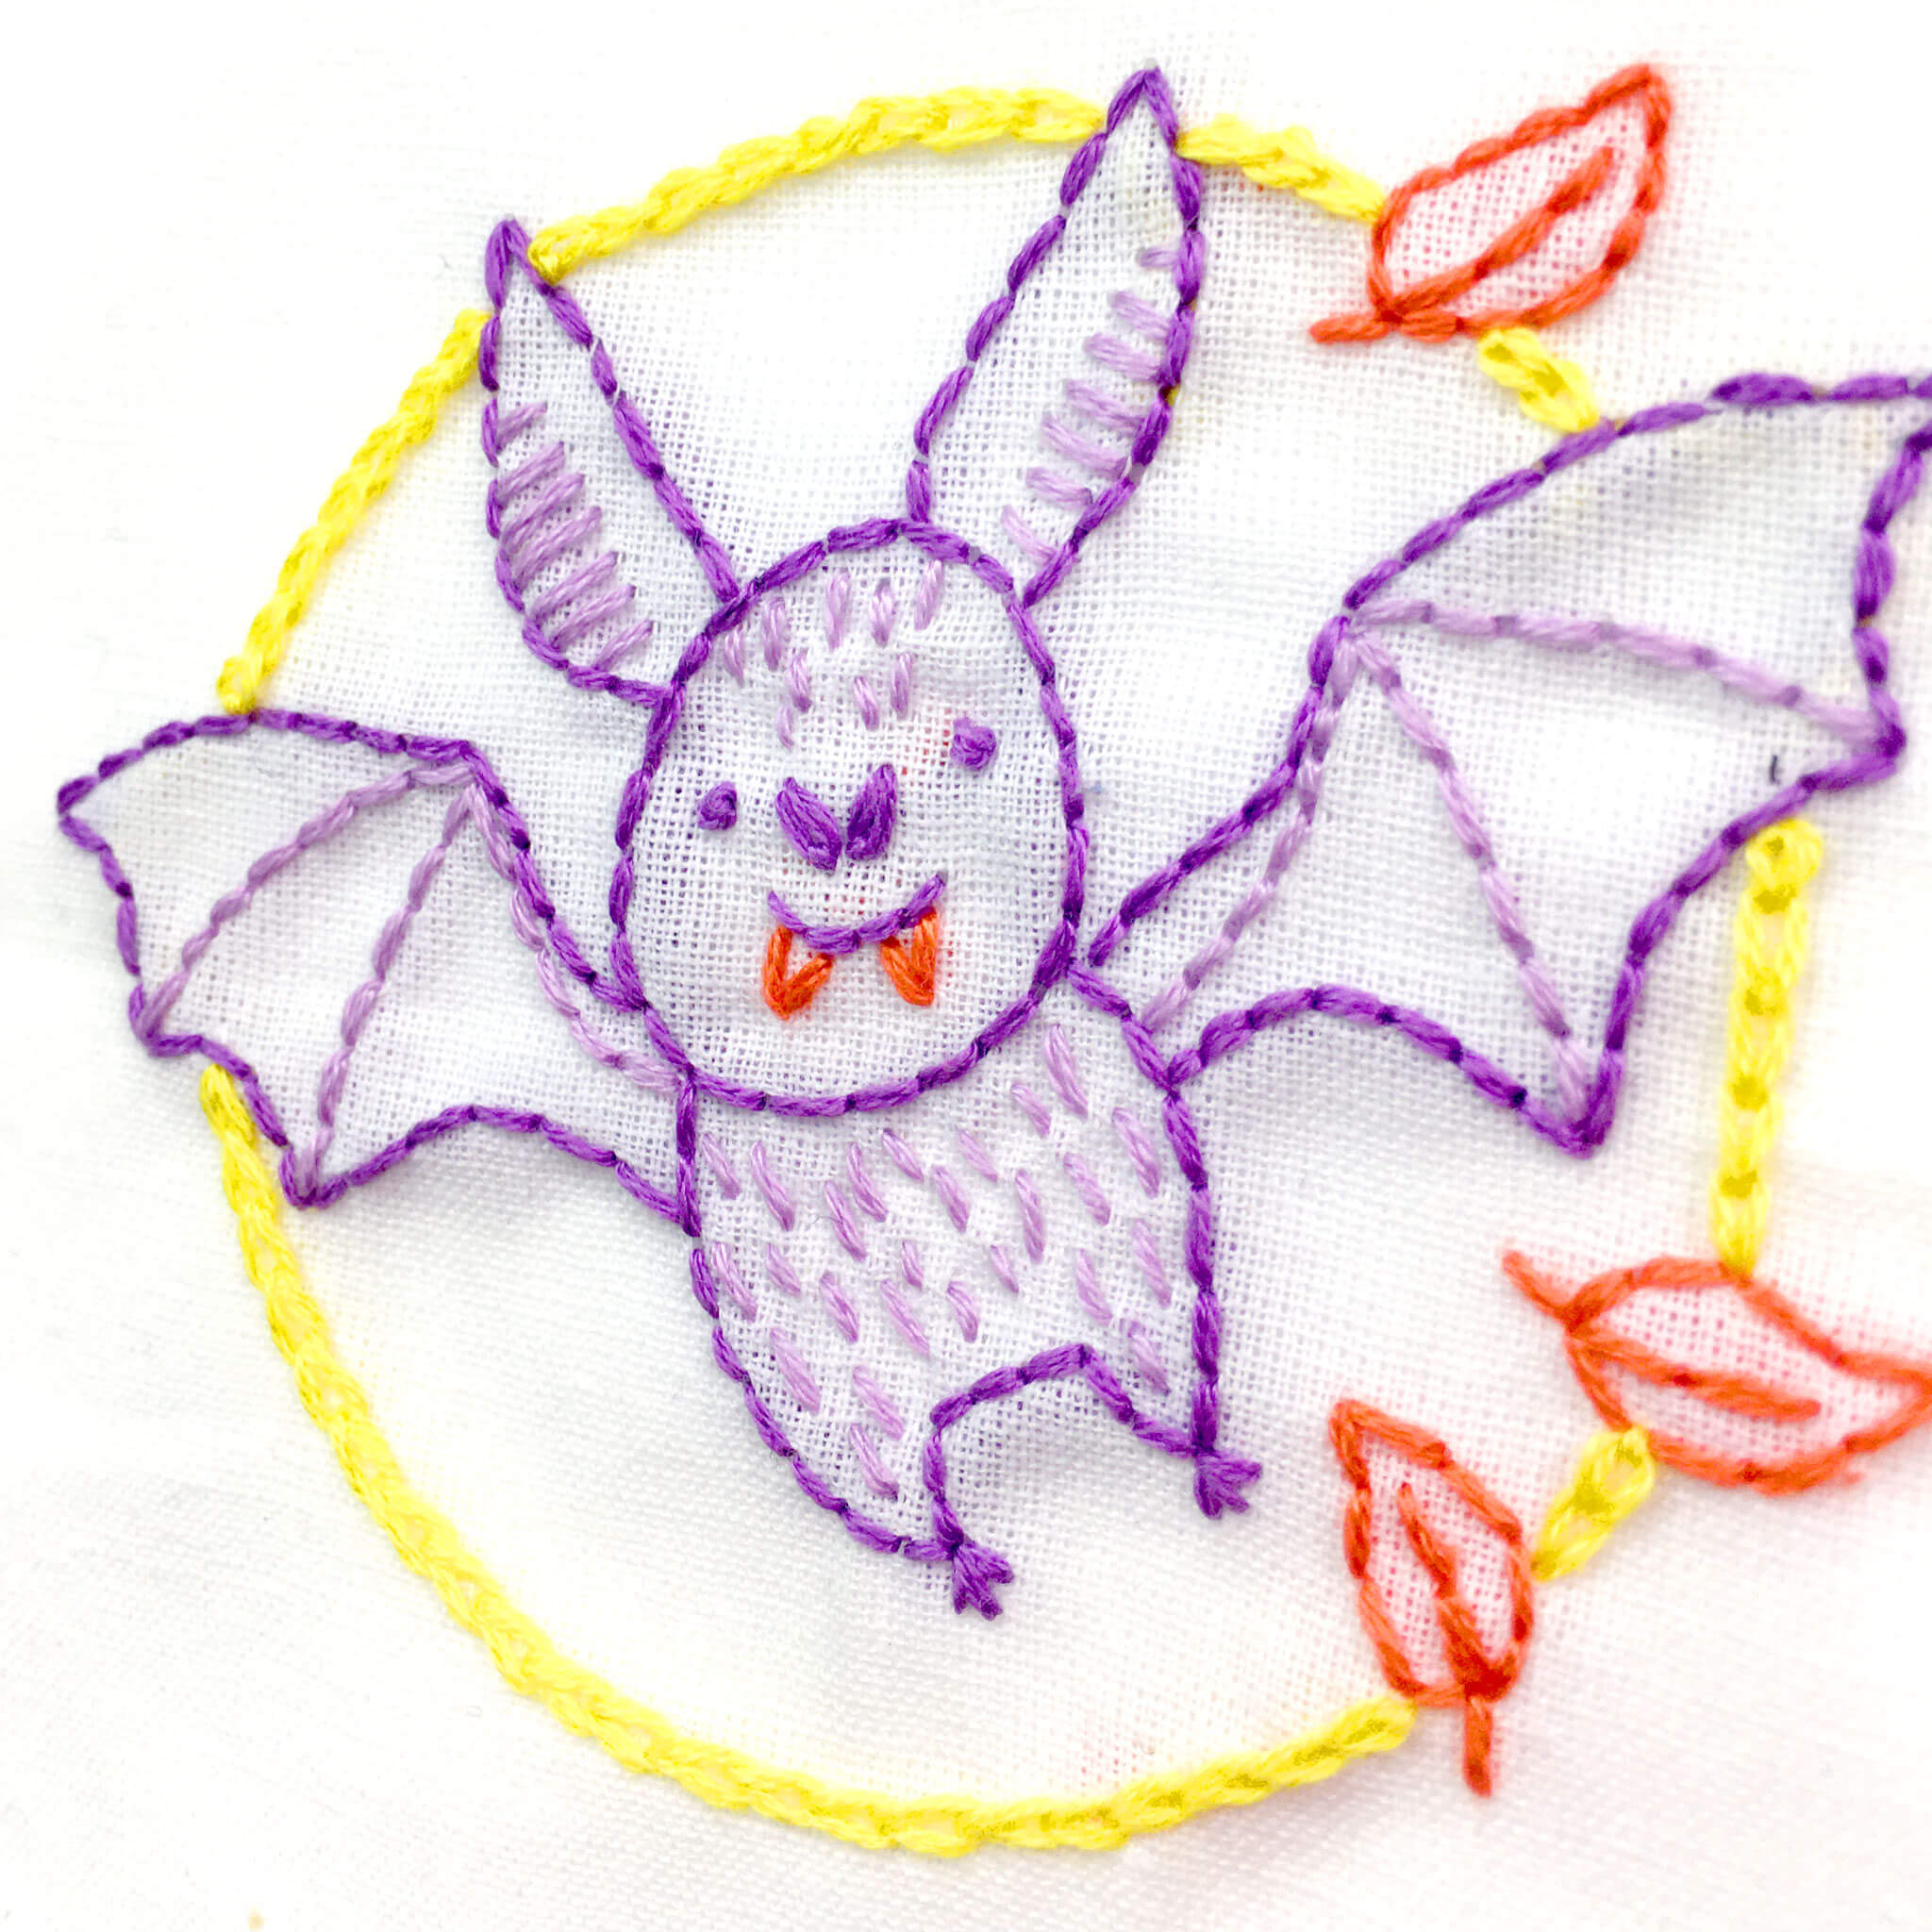 Bat embroidery pattern for halloween